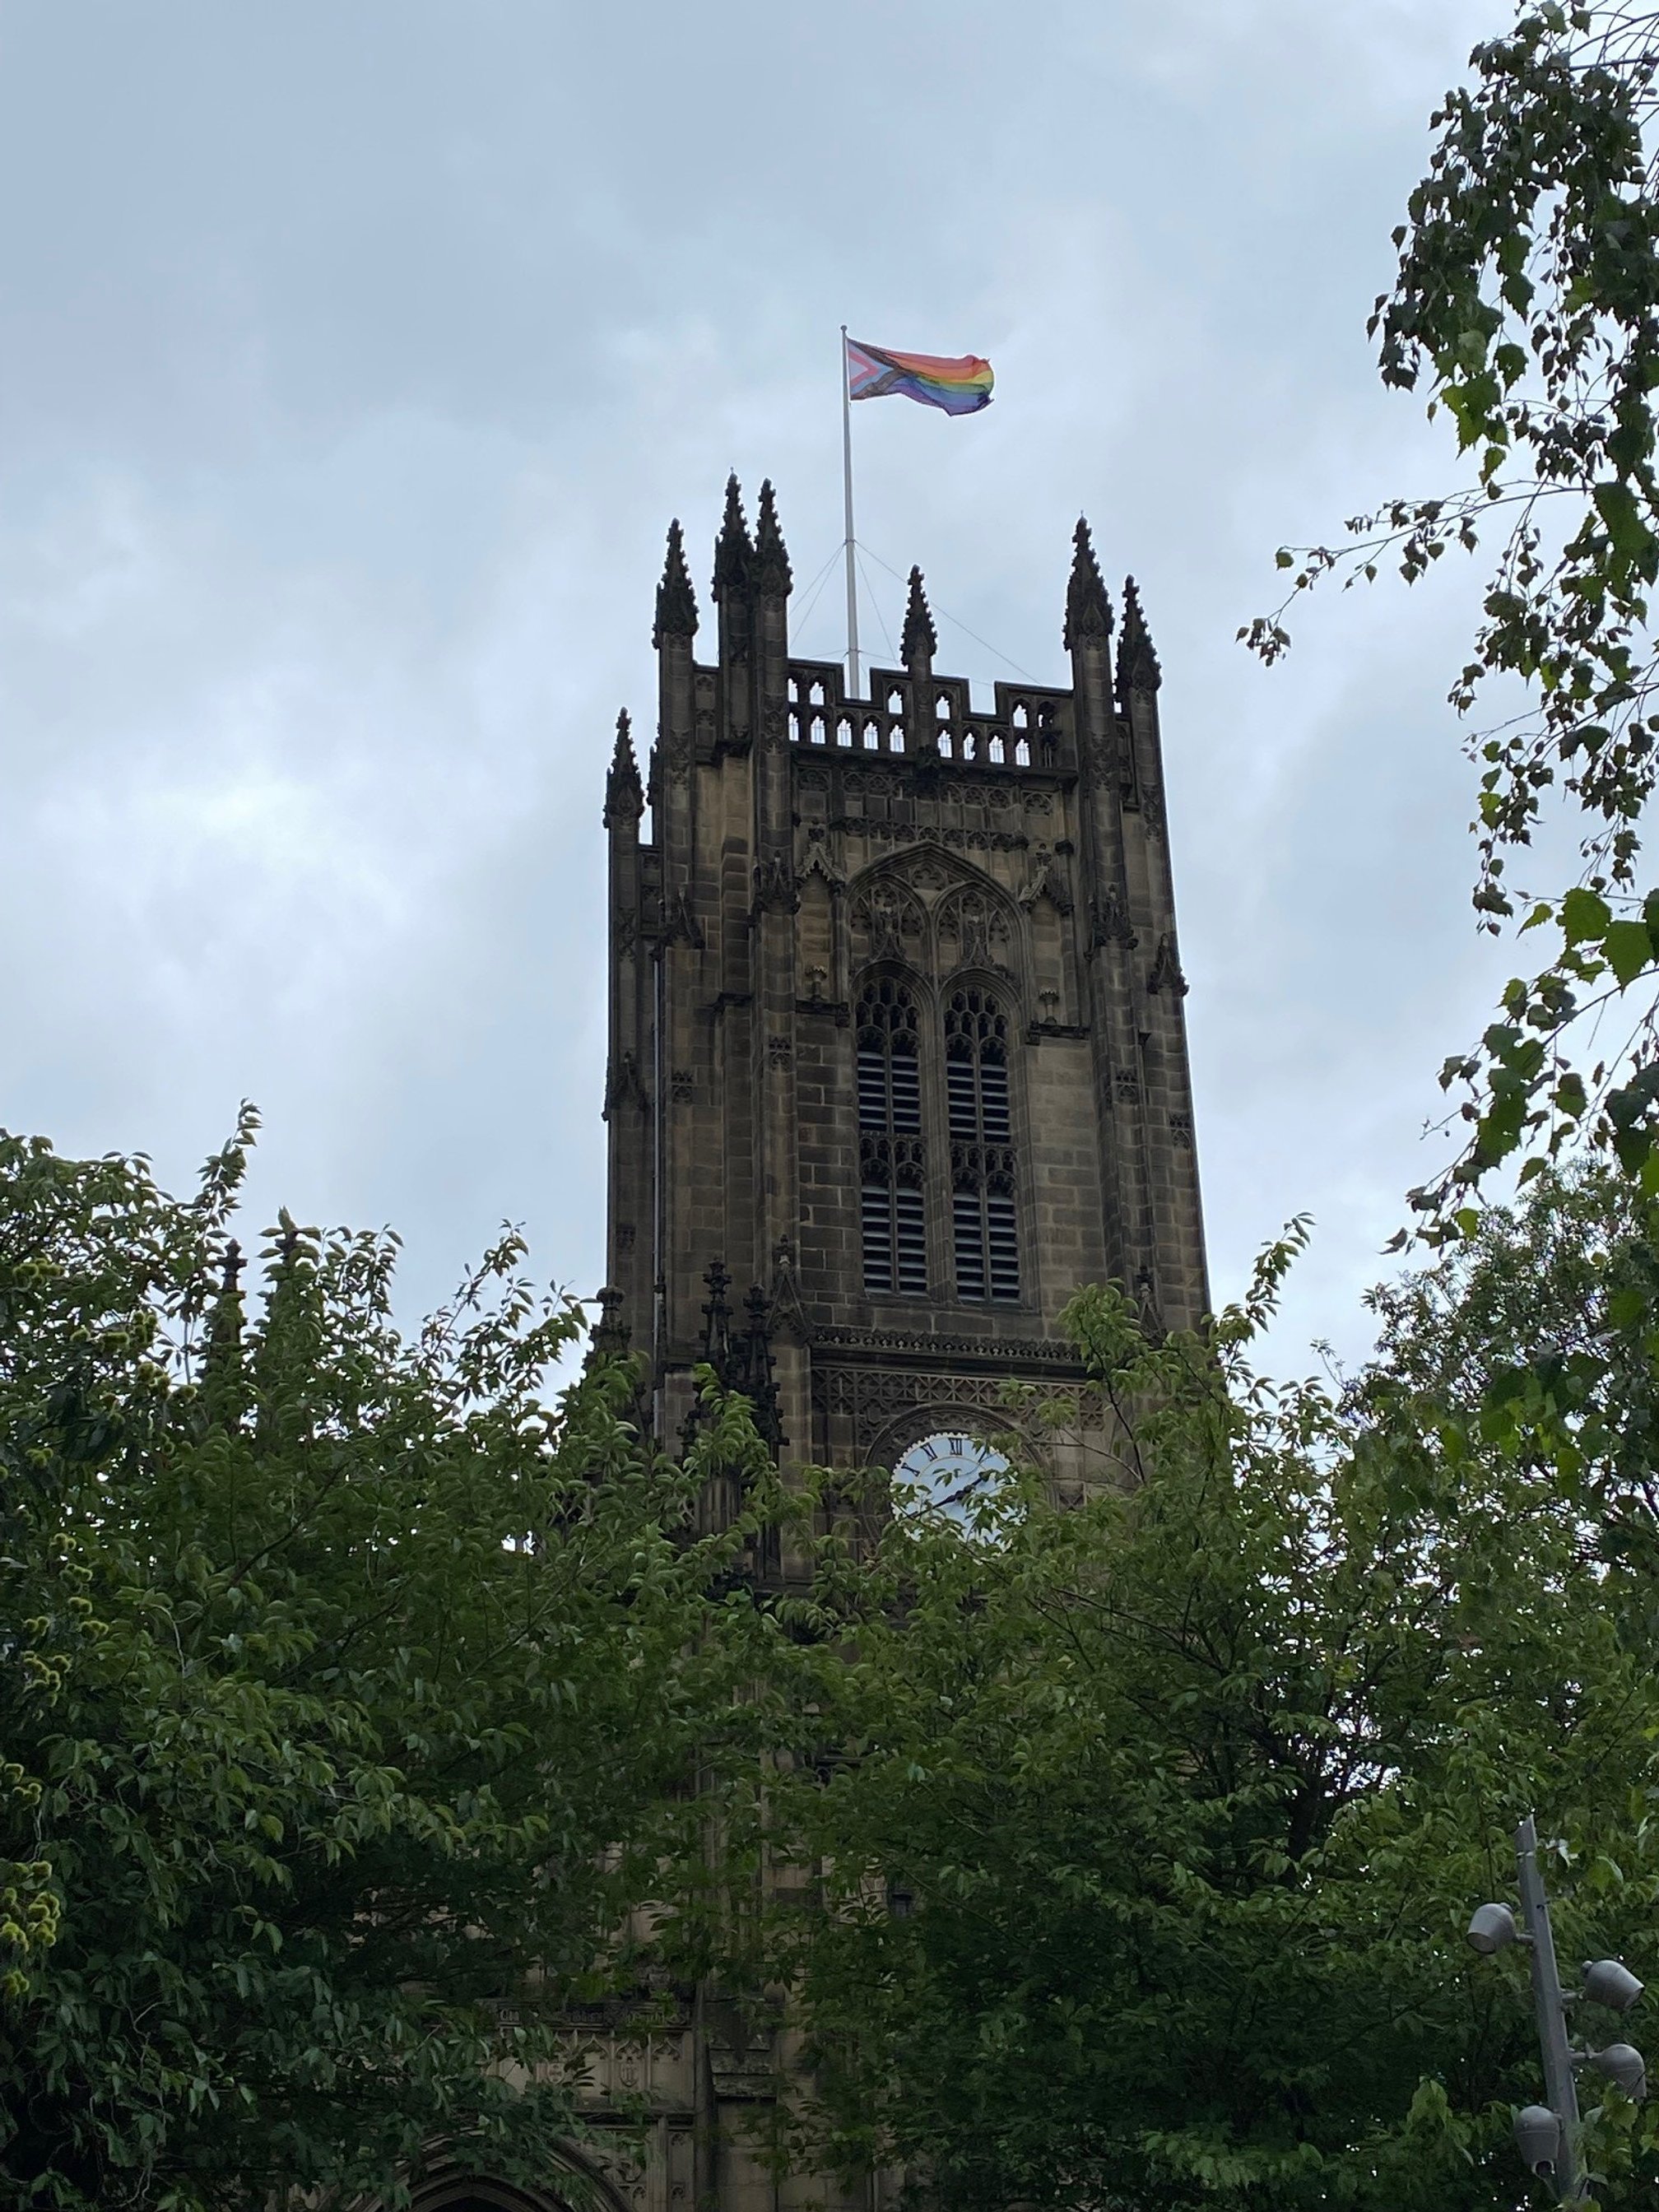  Manchester Cathedral with the Pride Progress flag flying on the roof fly it during Pride weekend last month. 